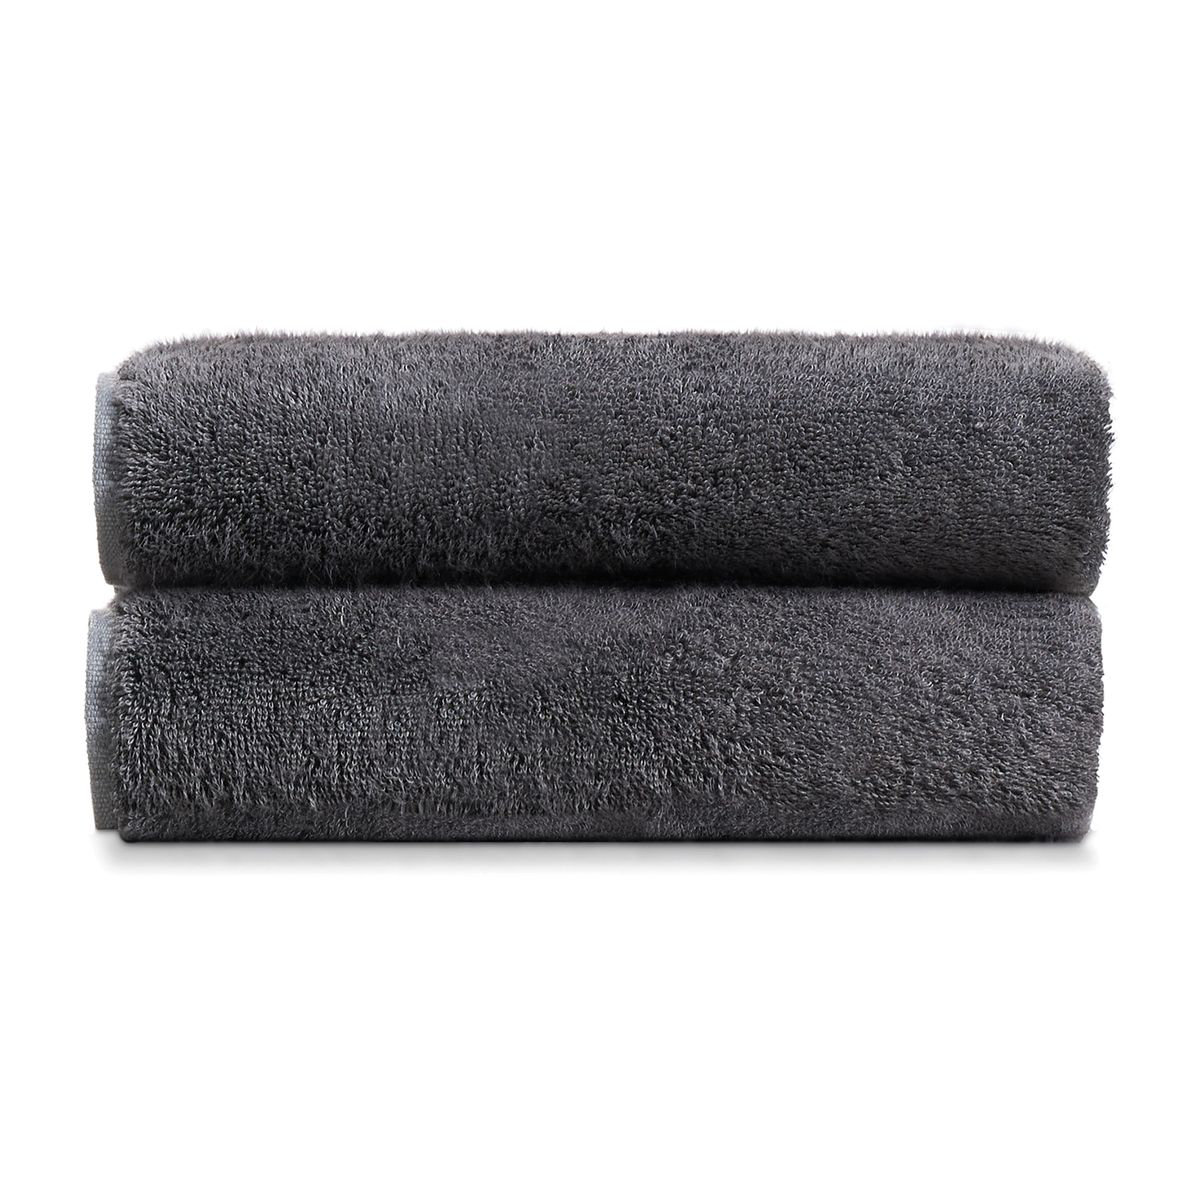 MyPillow: MyPillow Bath Towels Are Made With 100% USA Cotton